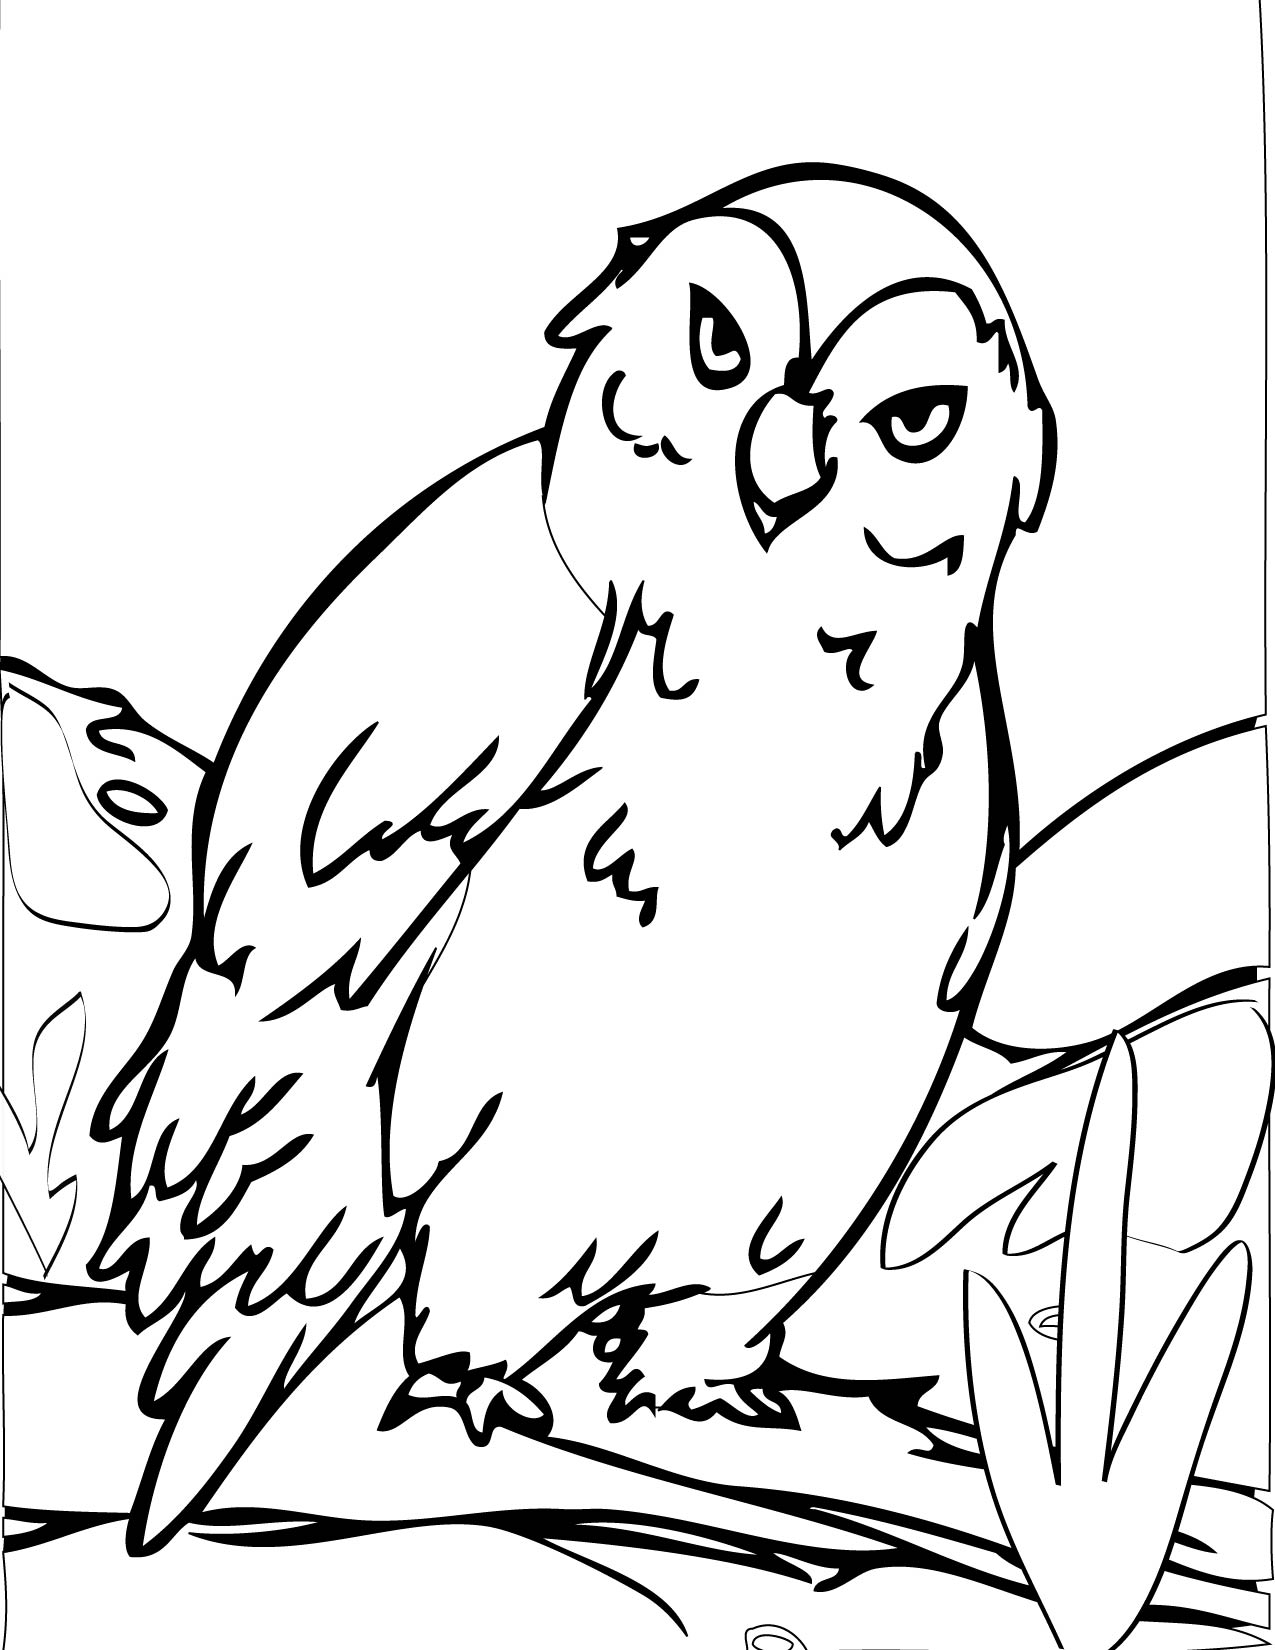 Drawing Owl #8467 (Animals) – Printable coloring pages